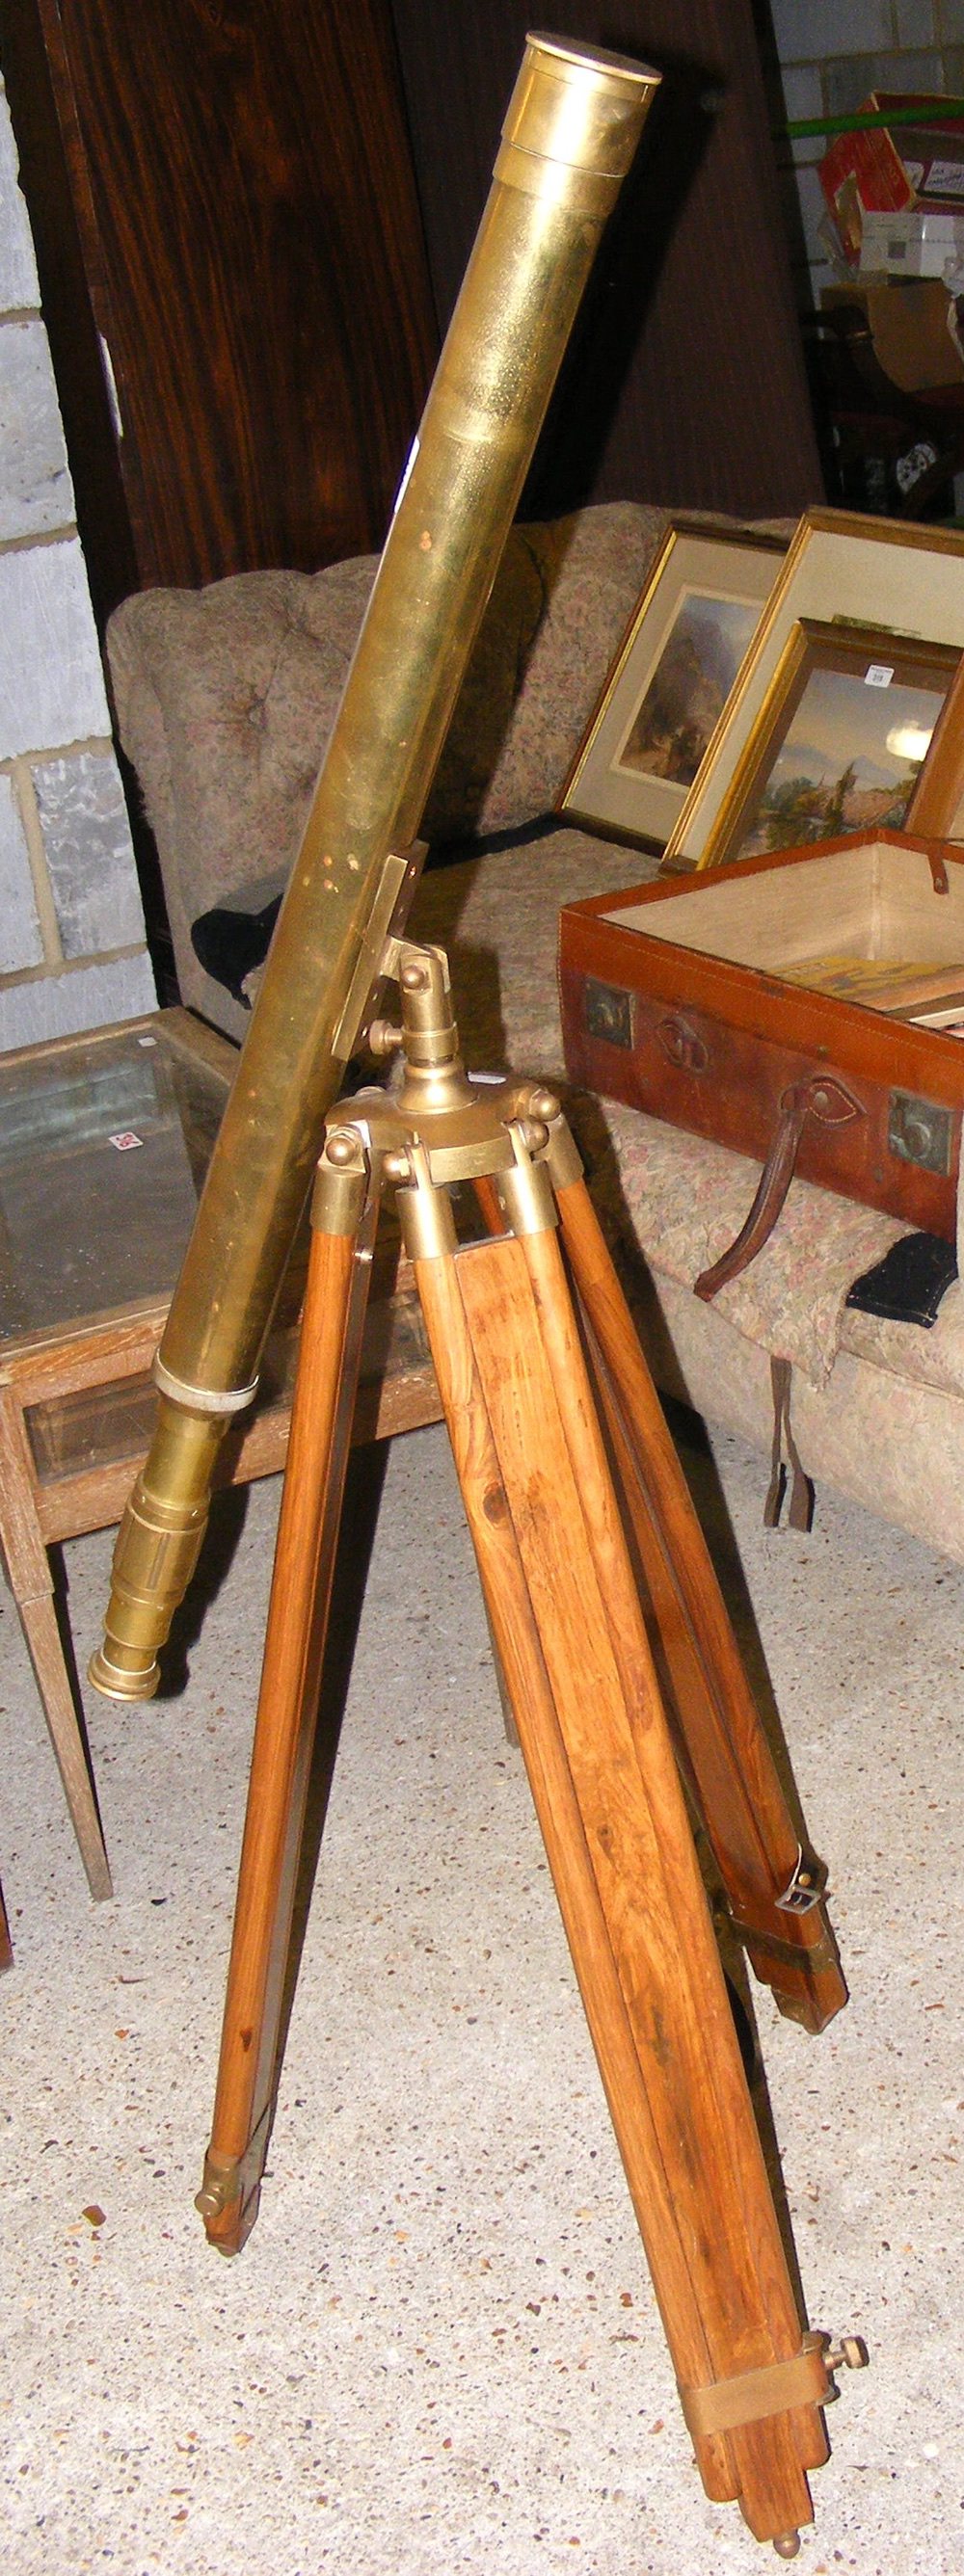 Reproduction telescope on adjustable stand